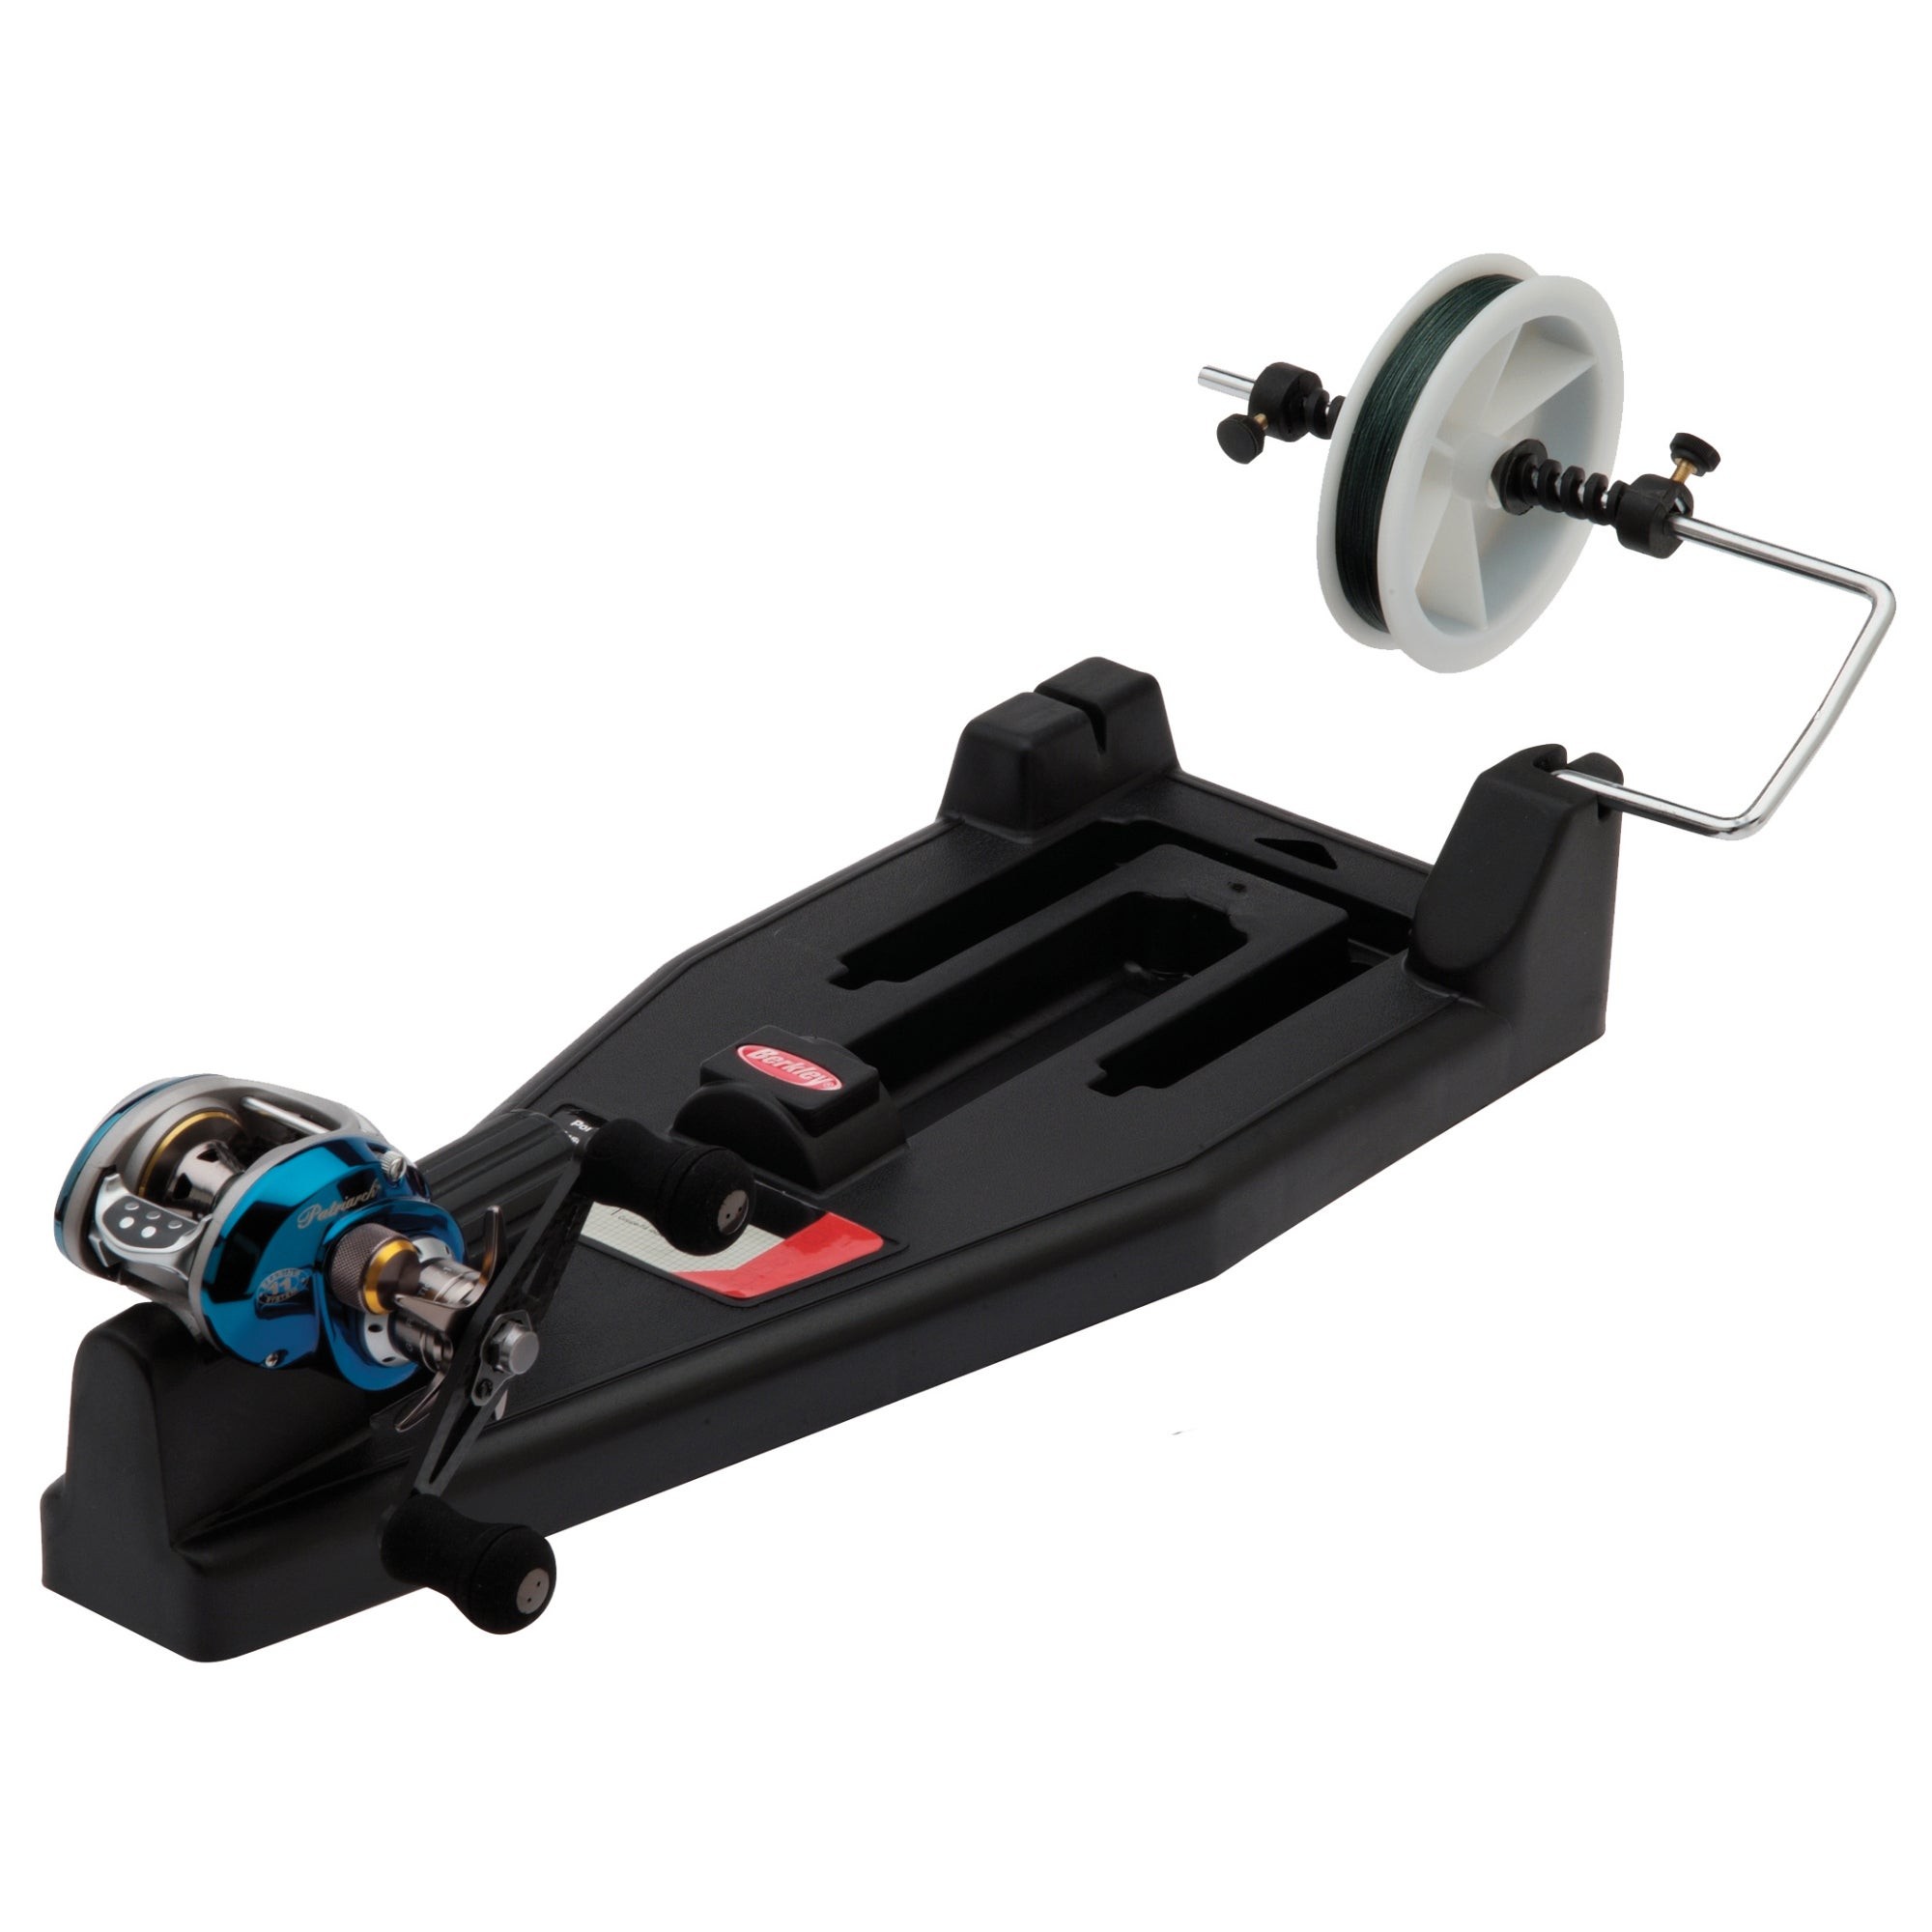 Portable Spooling Station